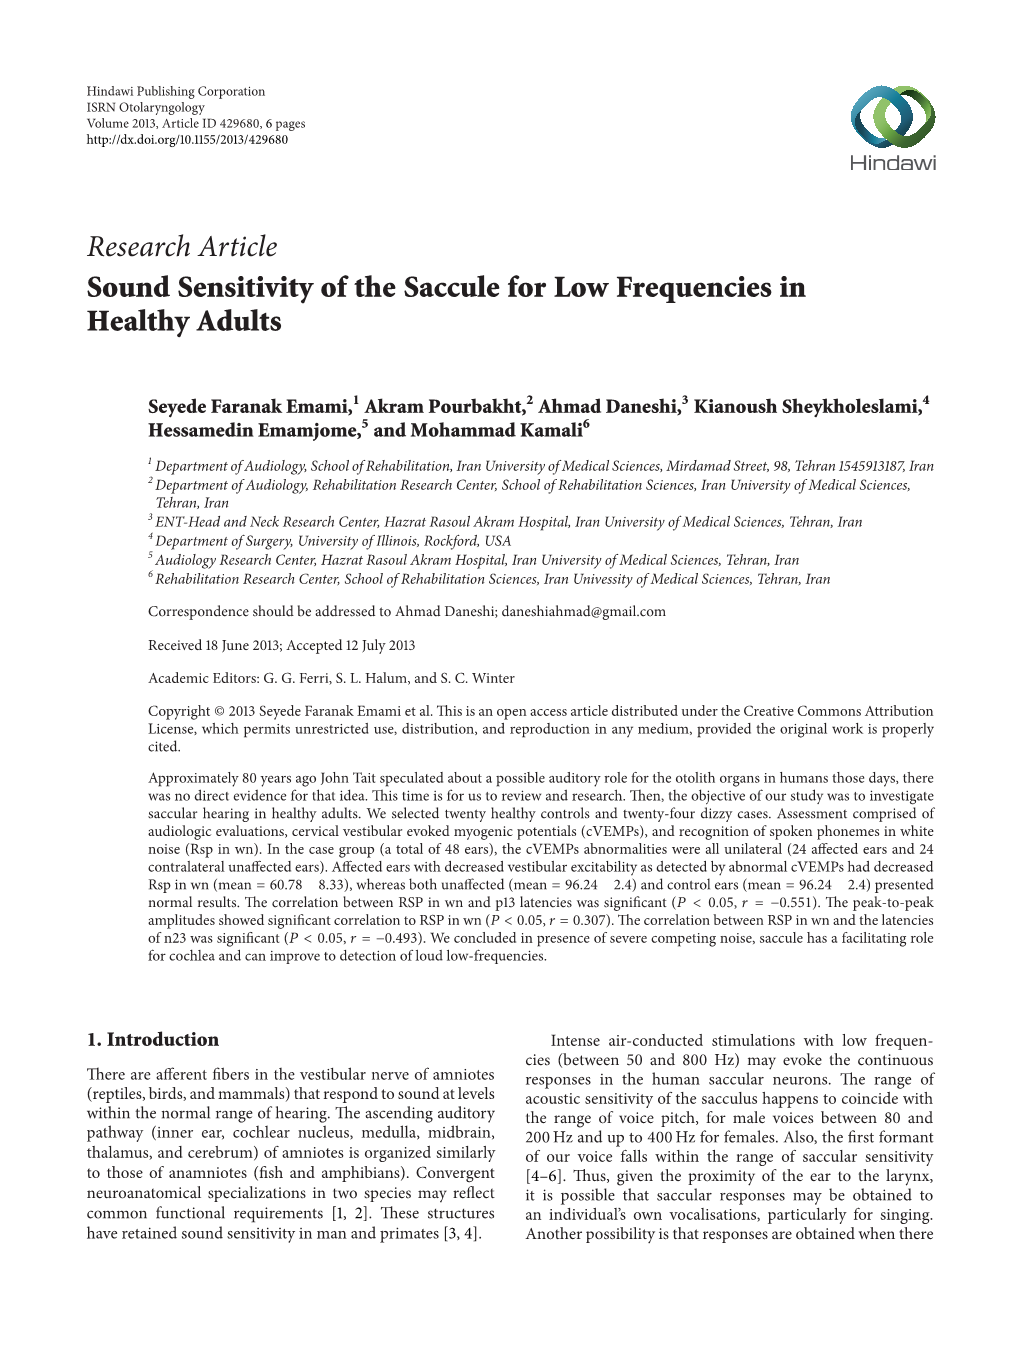 Sound Sensitivity of the Saccule for Low Frequencies in Healthy Adults